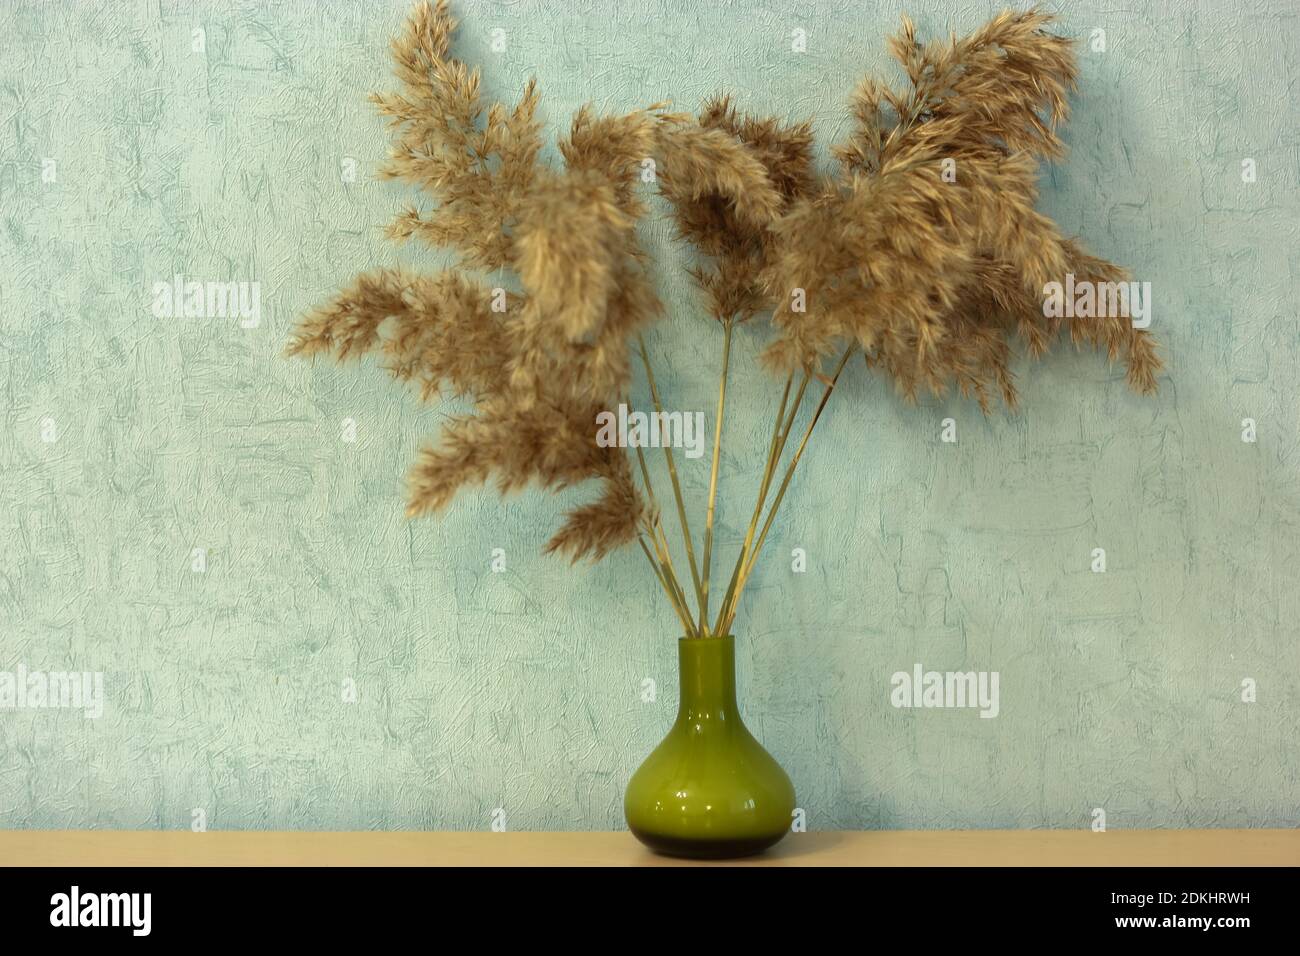 Pampas grass or cortaderia dioecious, Sello, in a little green vase close-up Stock Photo